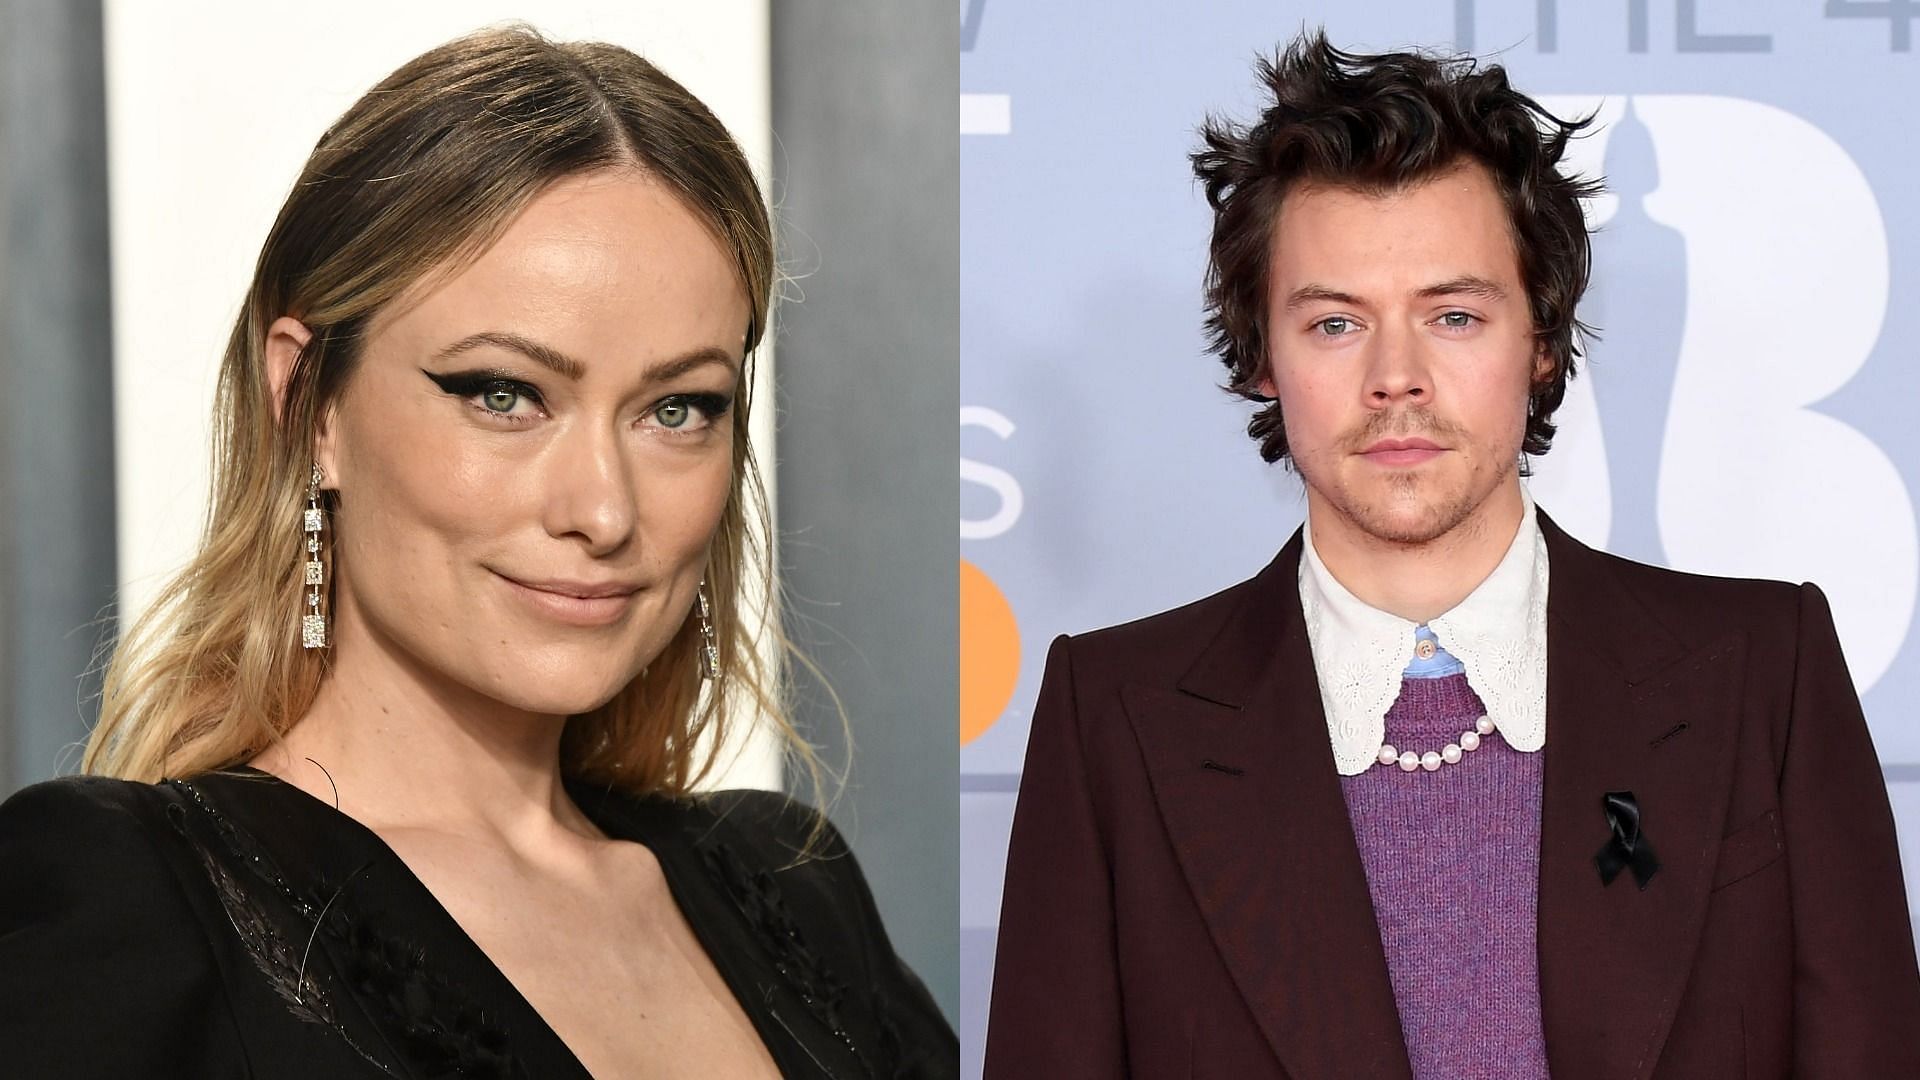 Olivia Wilde and Harry Styles are an in-demand couple (Images via Getty Images and WireImage)